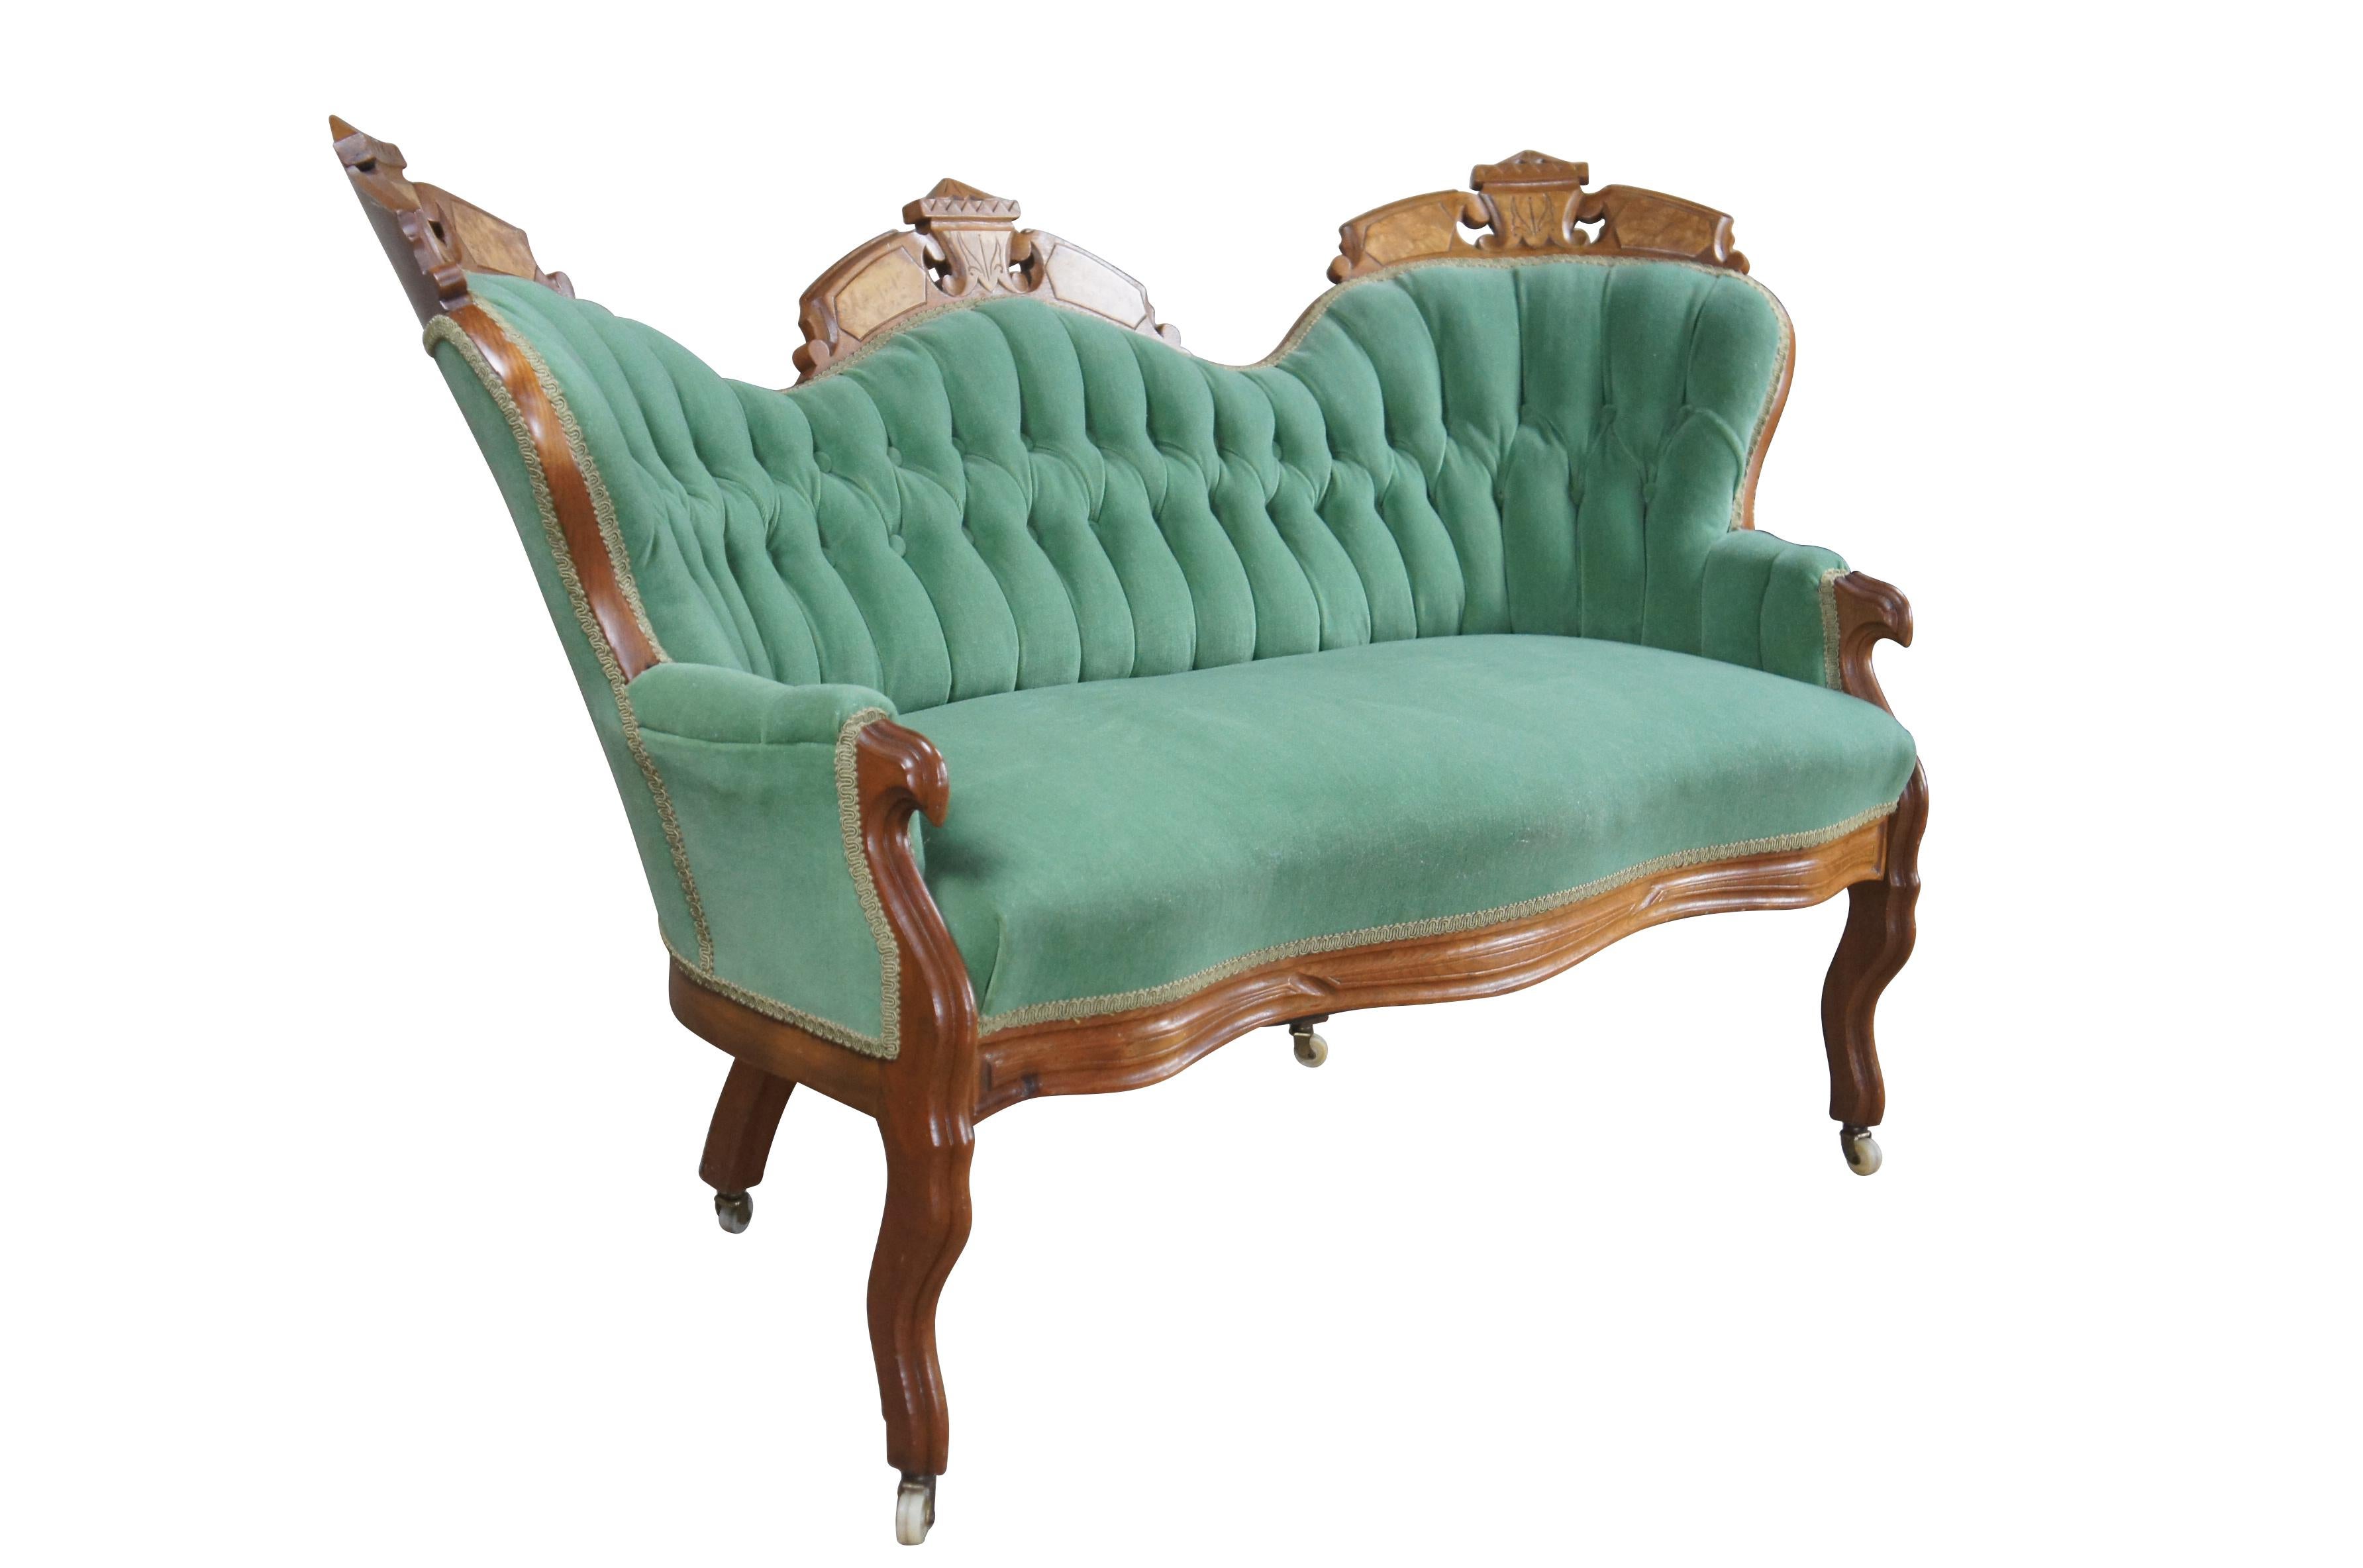 Antique Victorian Renaissance Revival parlor Settee.  Made from walnut with a serpentine form featuring a carved camelback with burled panels.  Upholstered in a green velvet / velour with a tufted back.  The settee is supported by contoured legs